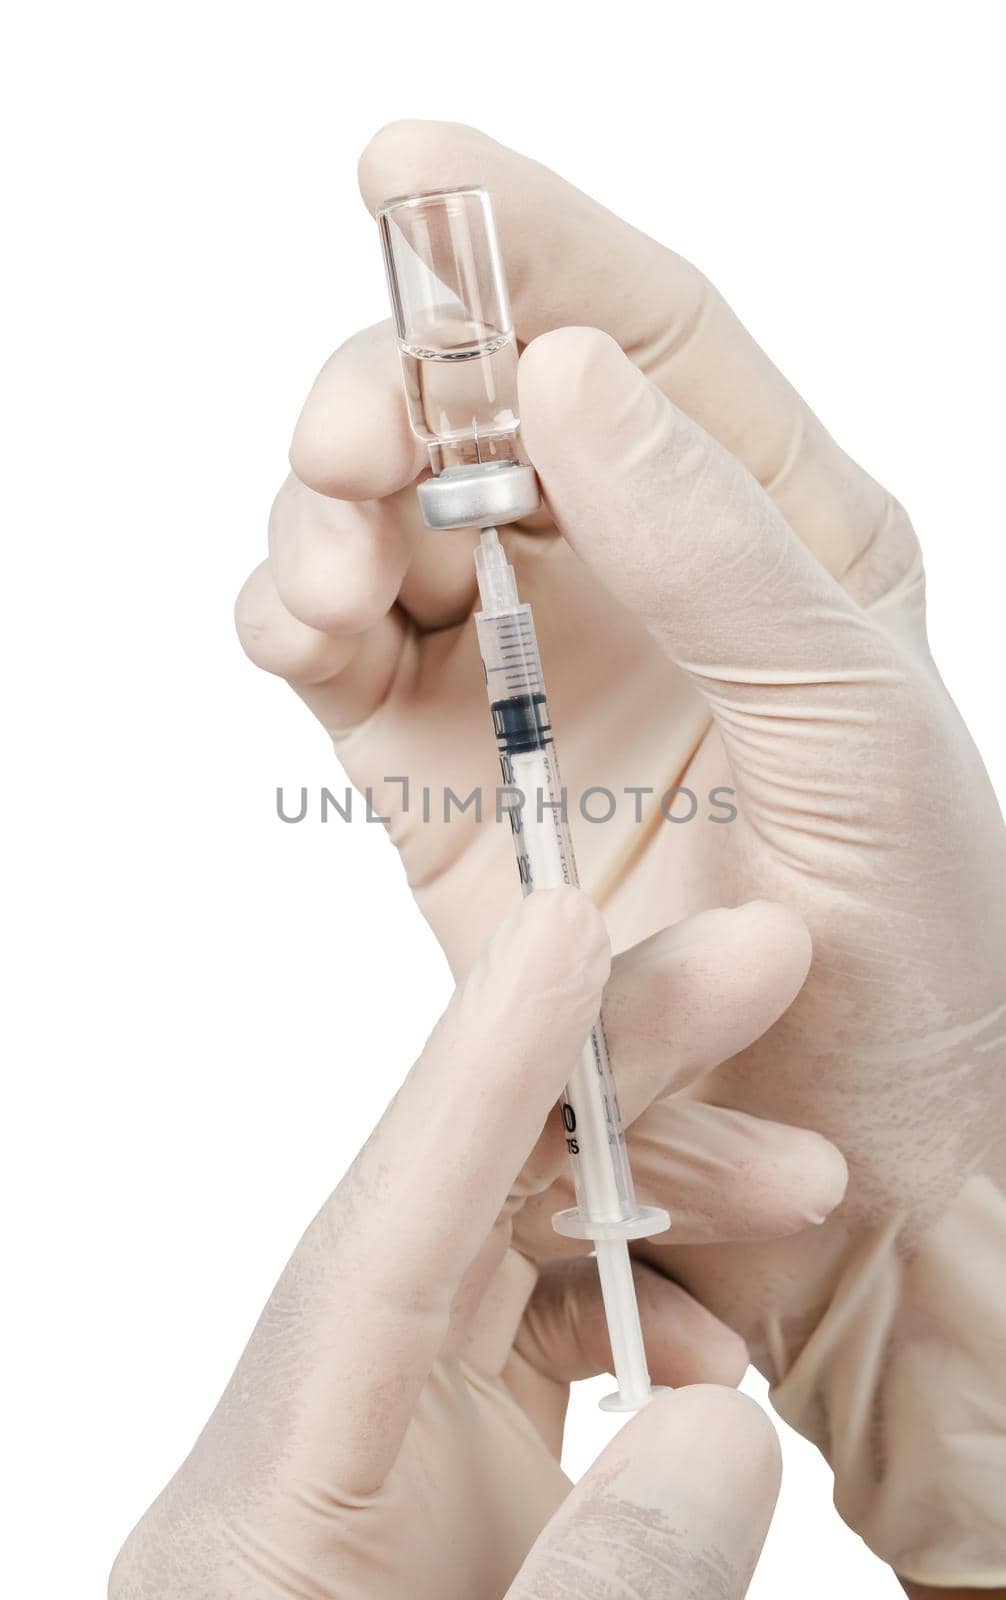 Syringe, medical injection vaccination in hand with glove. by Gamjai